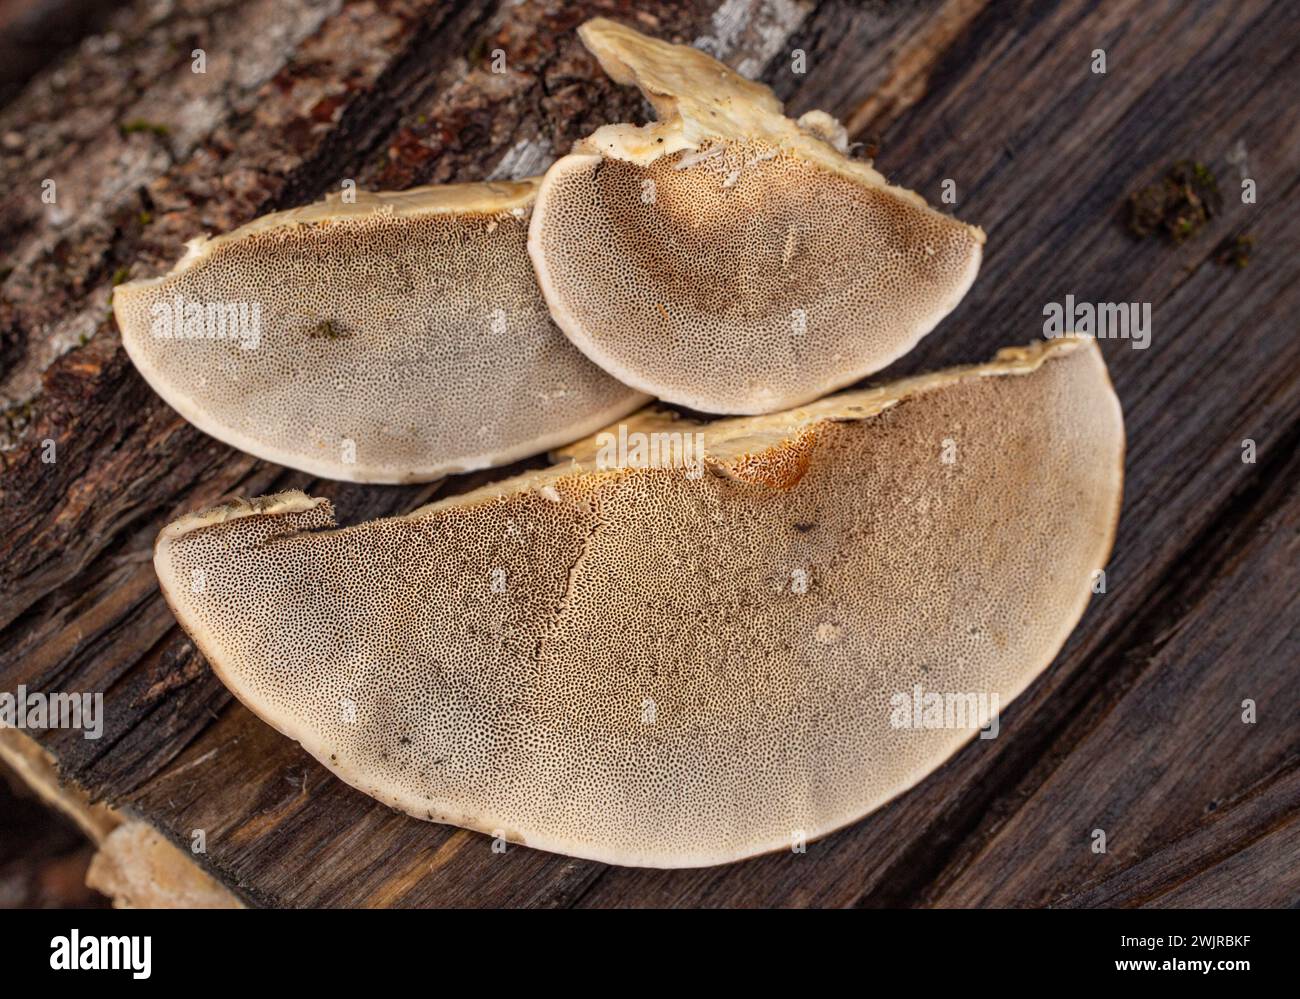 The pore surface of a bracket mushroom, Trametes pubescens, found growing on a black cottonwood log, in Troy, Montana Stock Photo